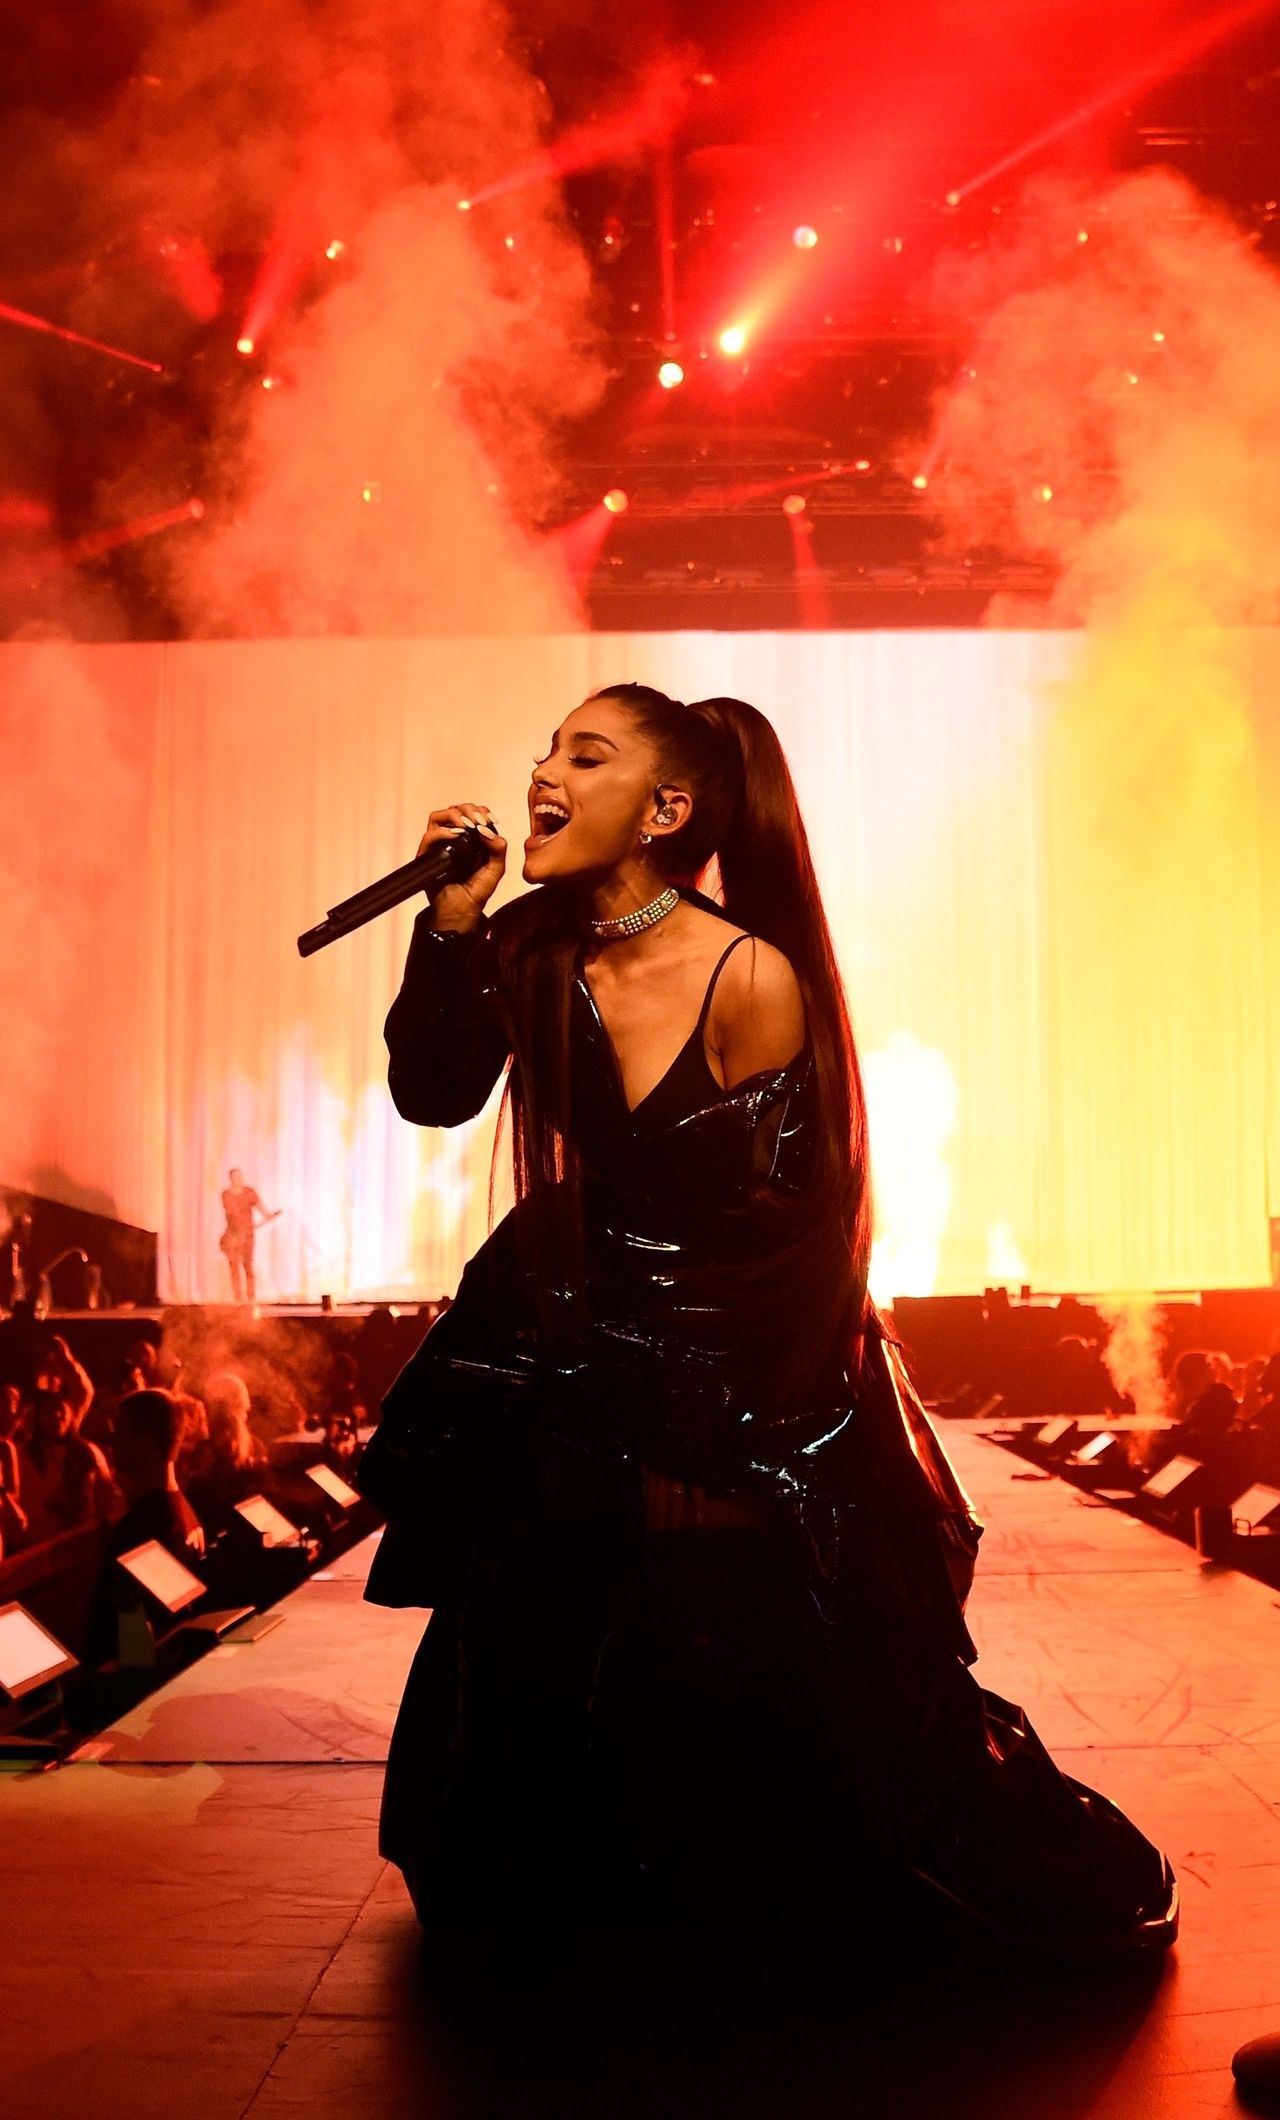 Ariana Grande Live Performance On Stage iPhone HD 4k